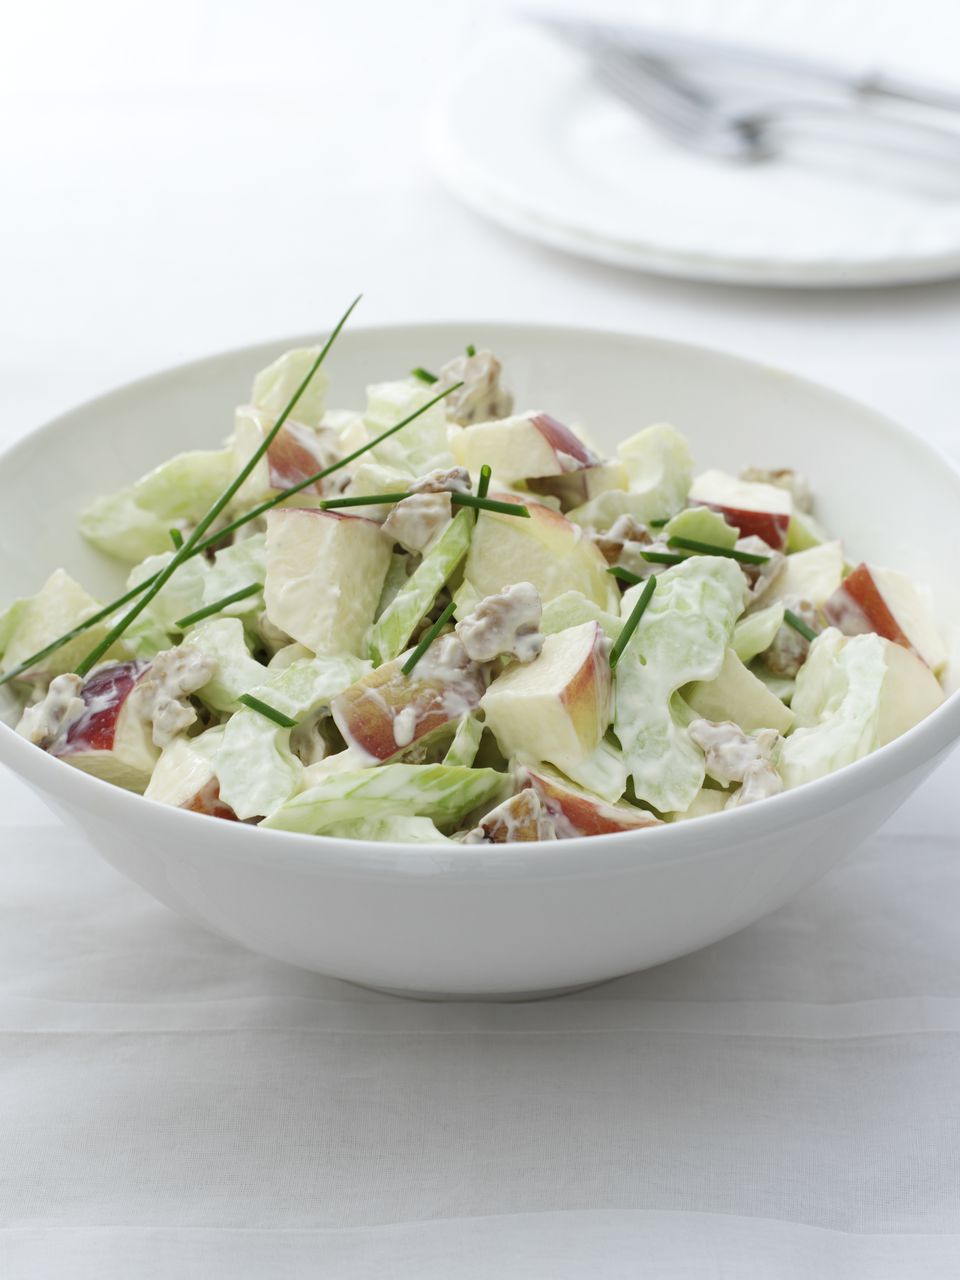 Classic Waldorf Salad Recipe With Apples and Walnuts